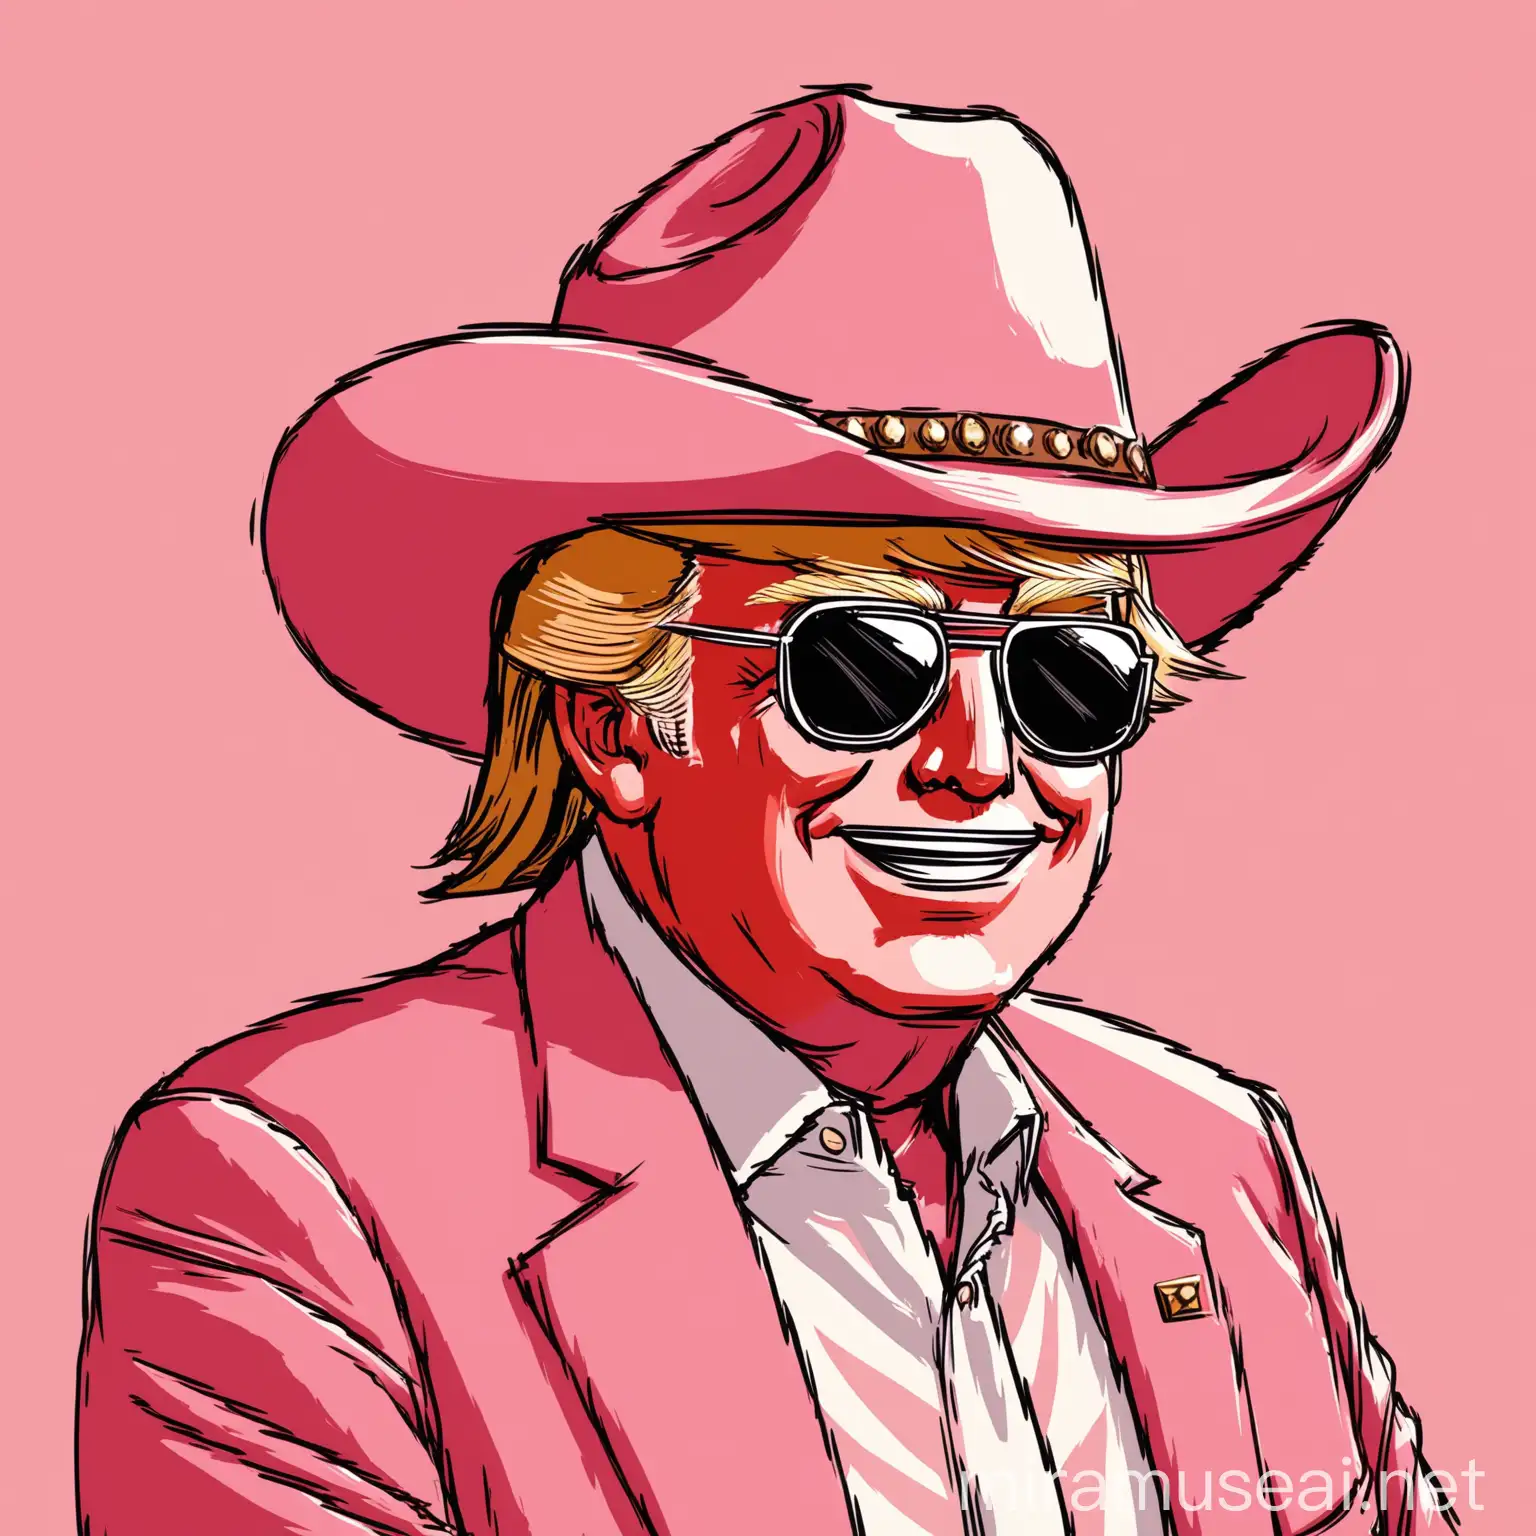 illustration of Donald Trump in pink, wears cowboy hat and sunglasses, happy 